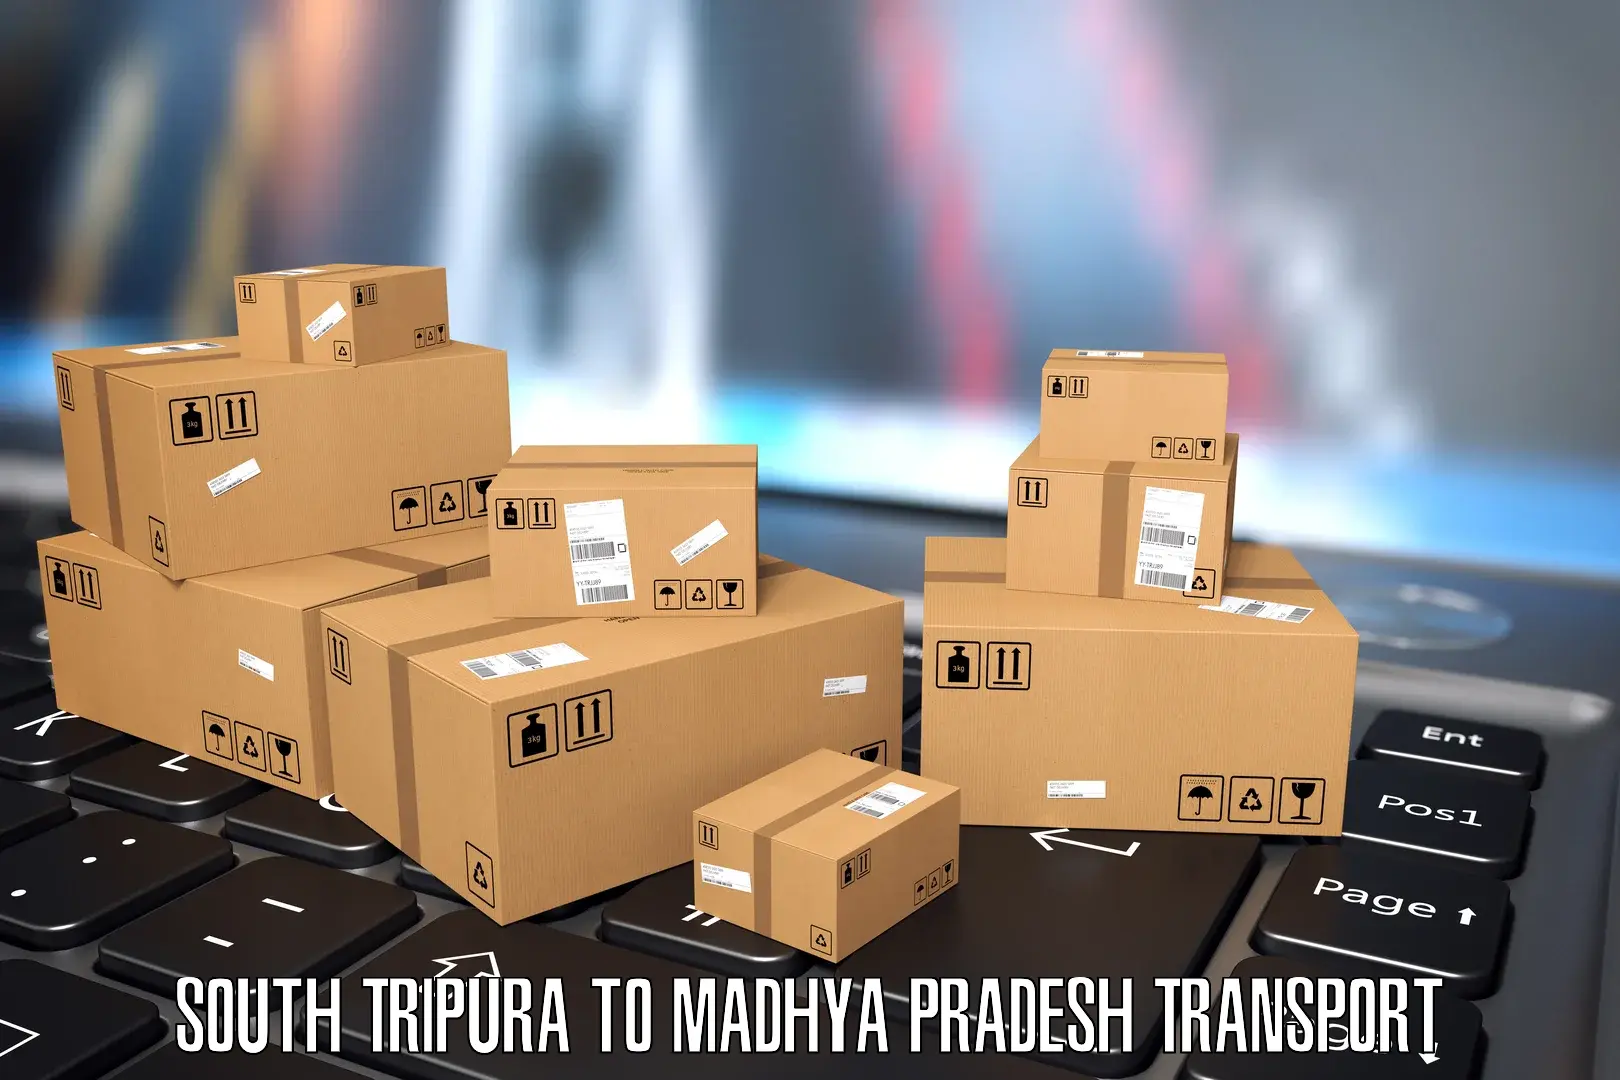 Commercial transport service South Tripura to IIIT Bhopal